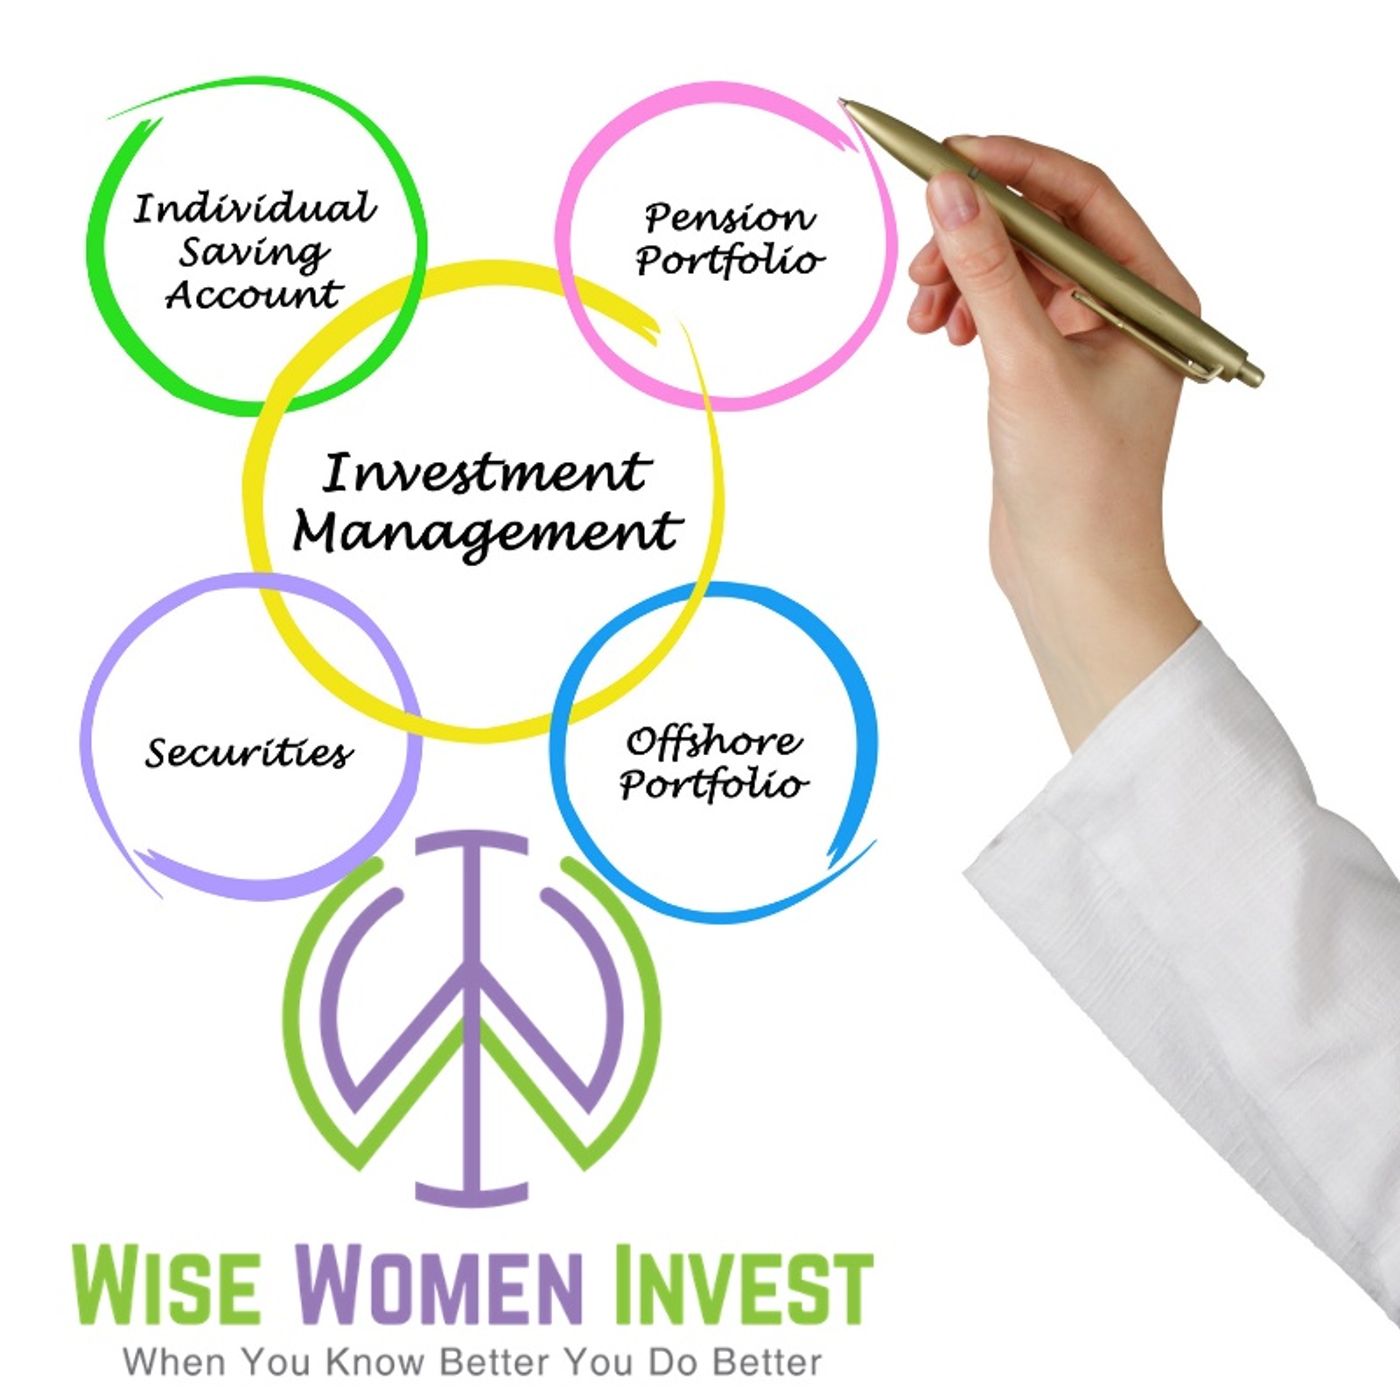 GMG Presents: Wise Women Invest Wednesday